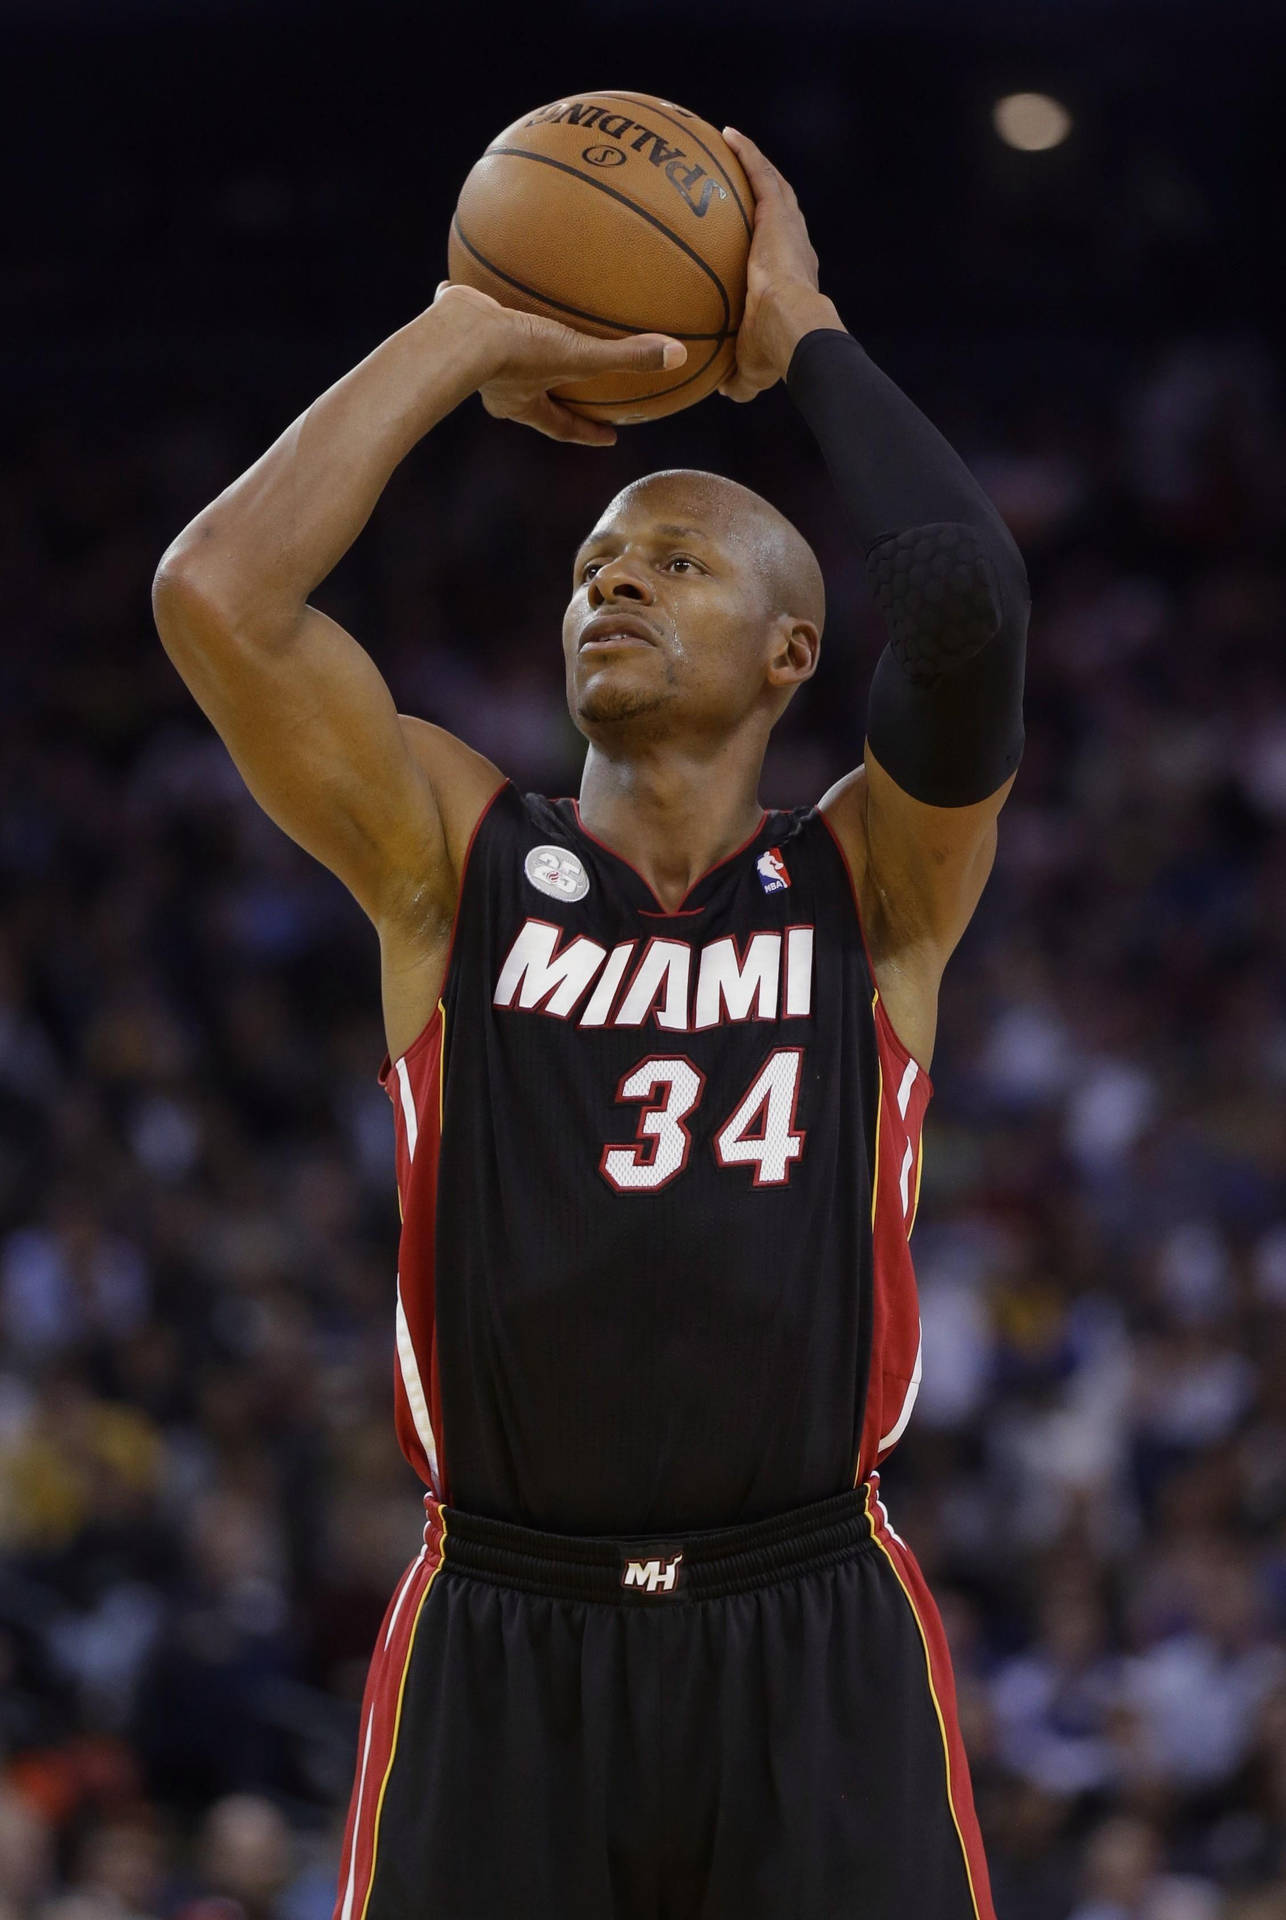 ray allen shooting free throws